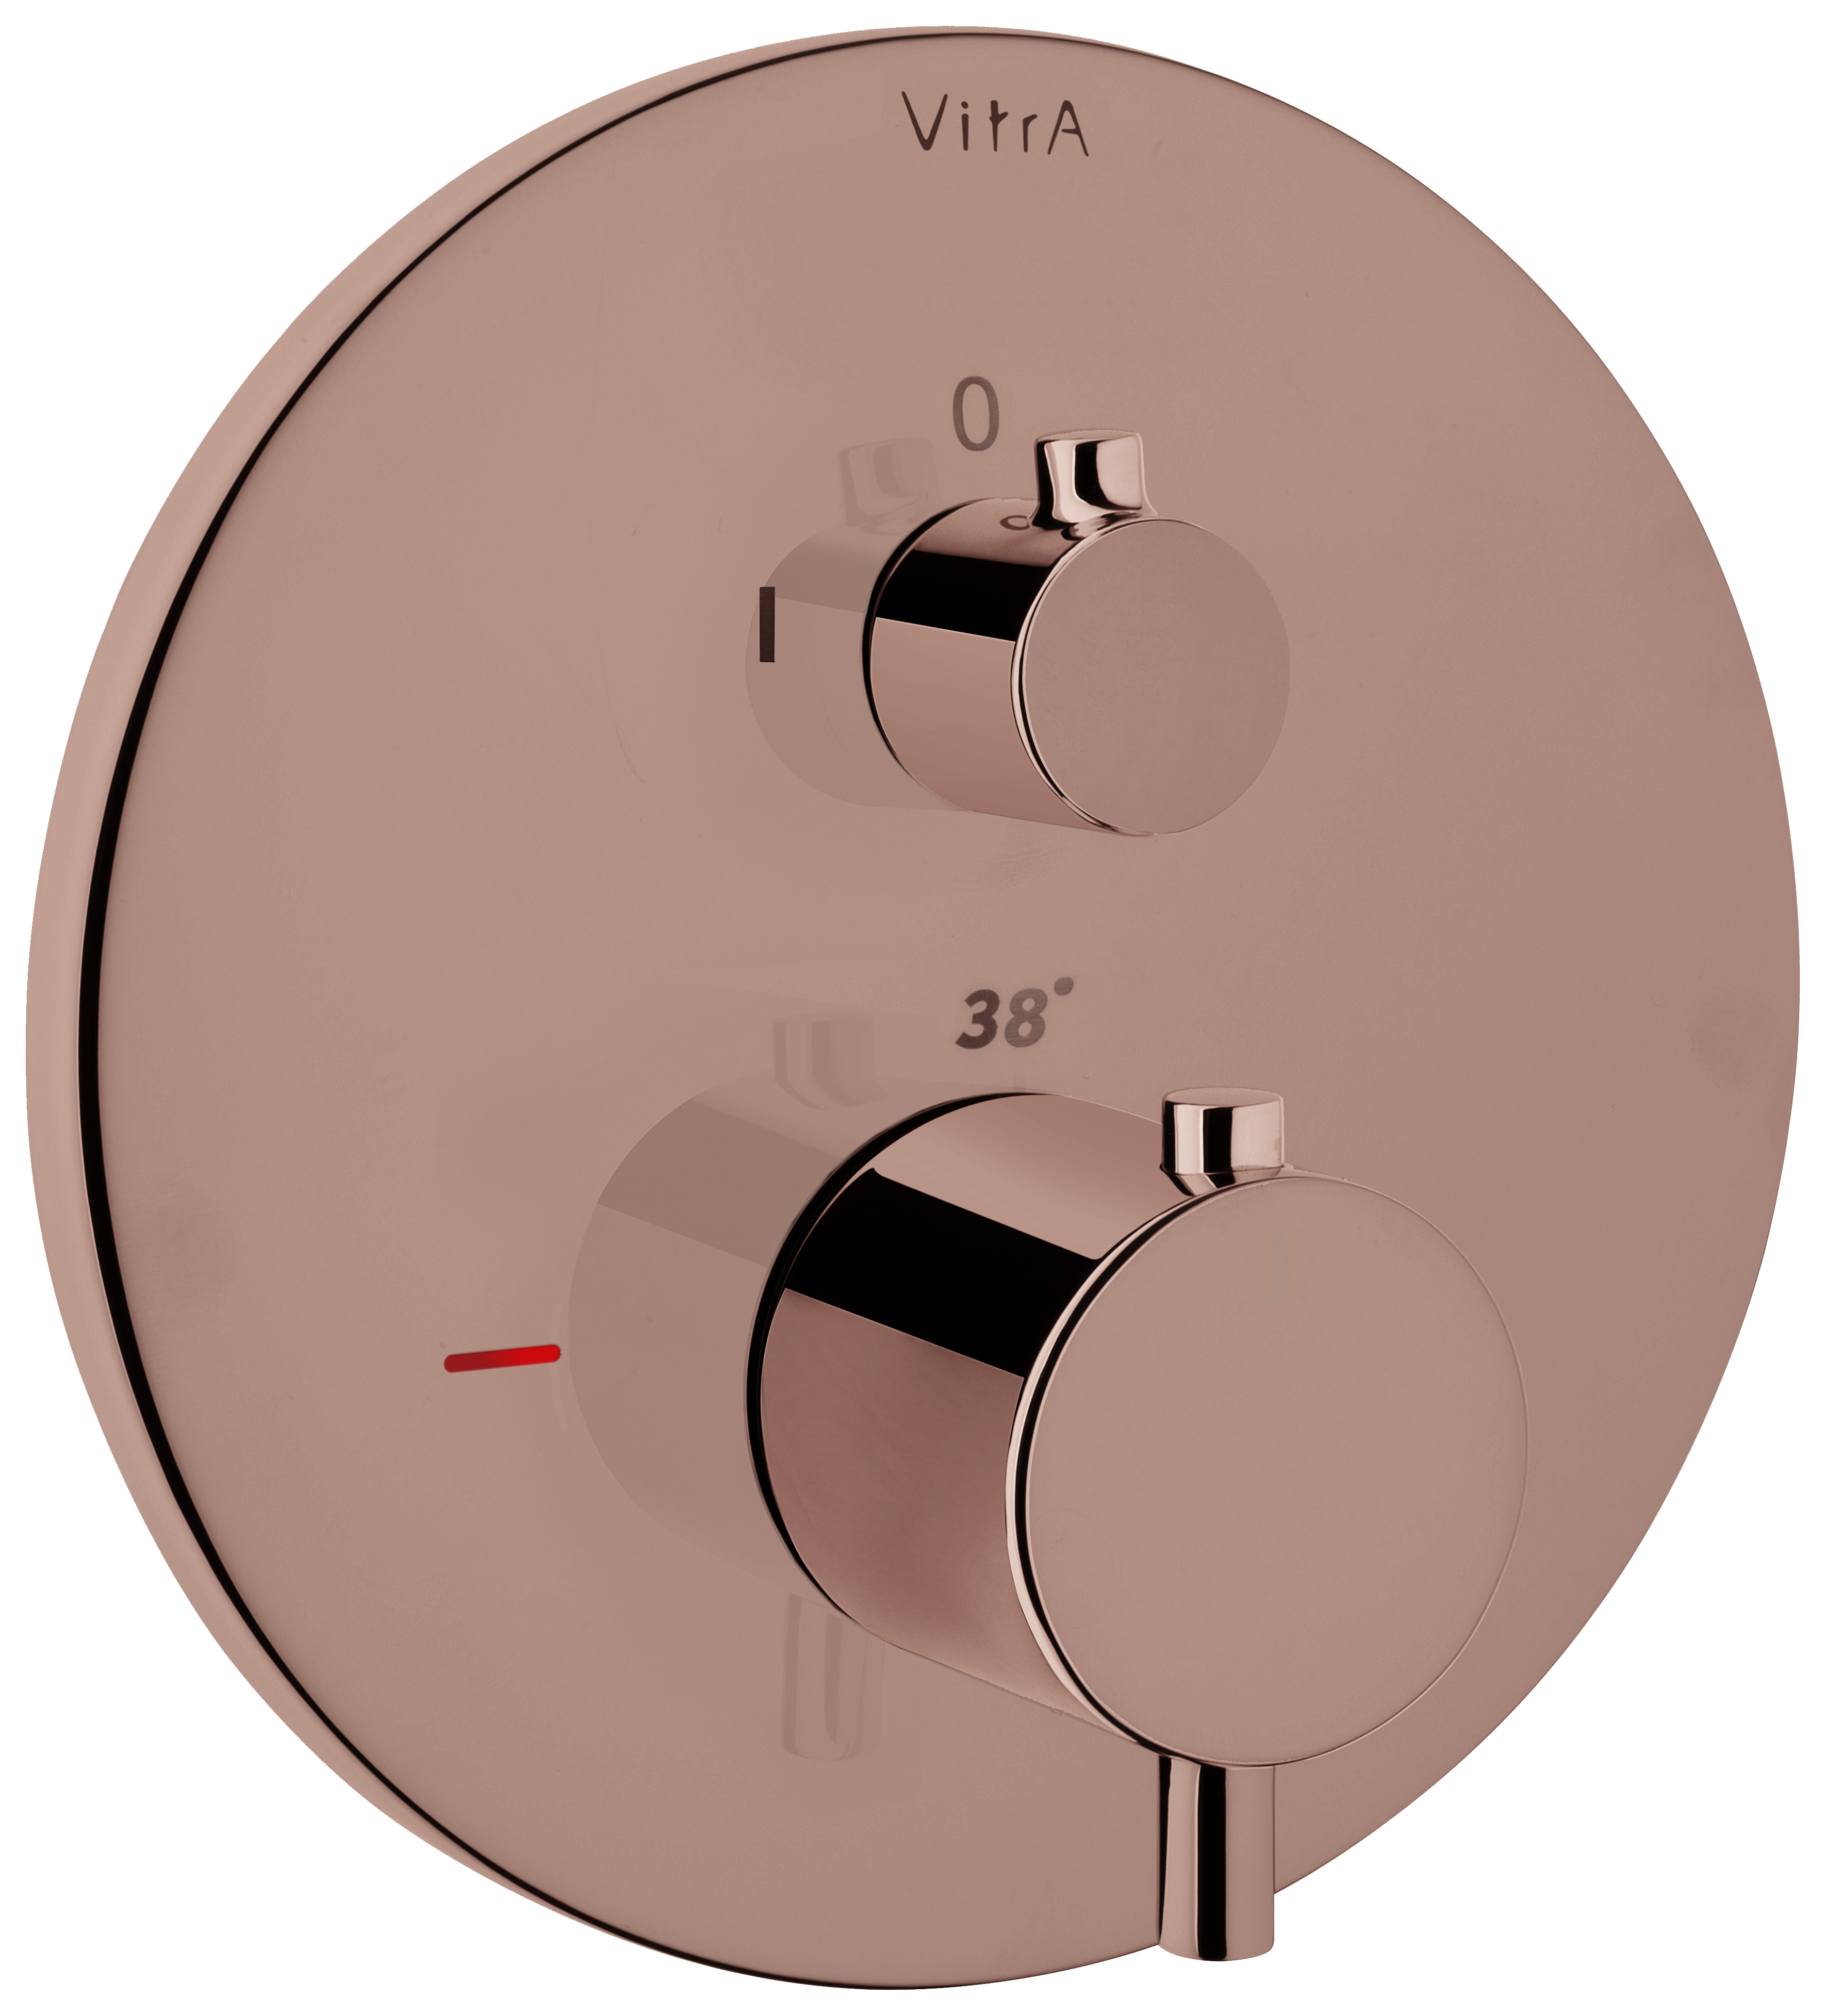 VitrA Origin Round Built-In 1 Way Thermostatic Shower Mixer Valve - Soft Copper